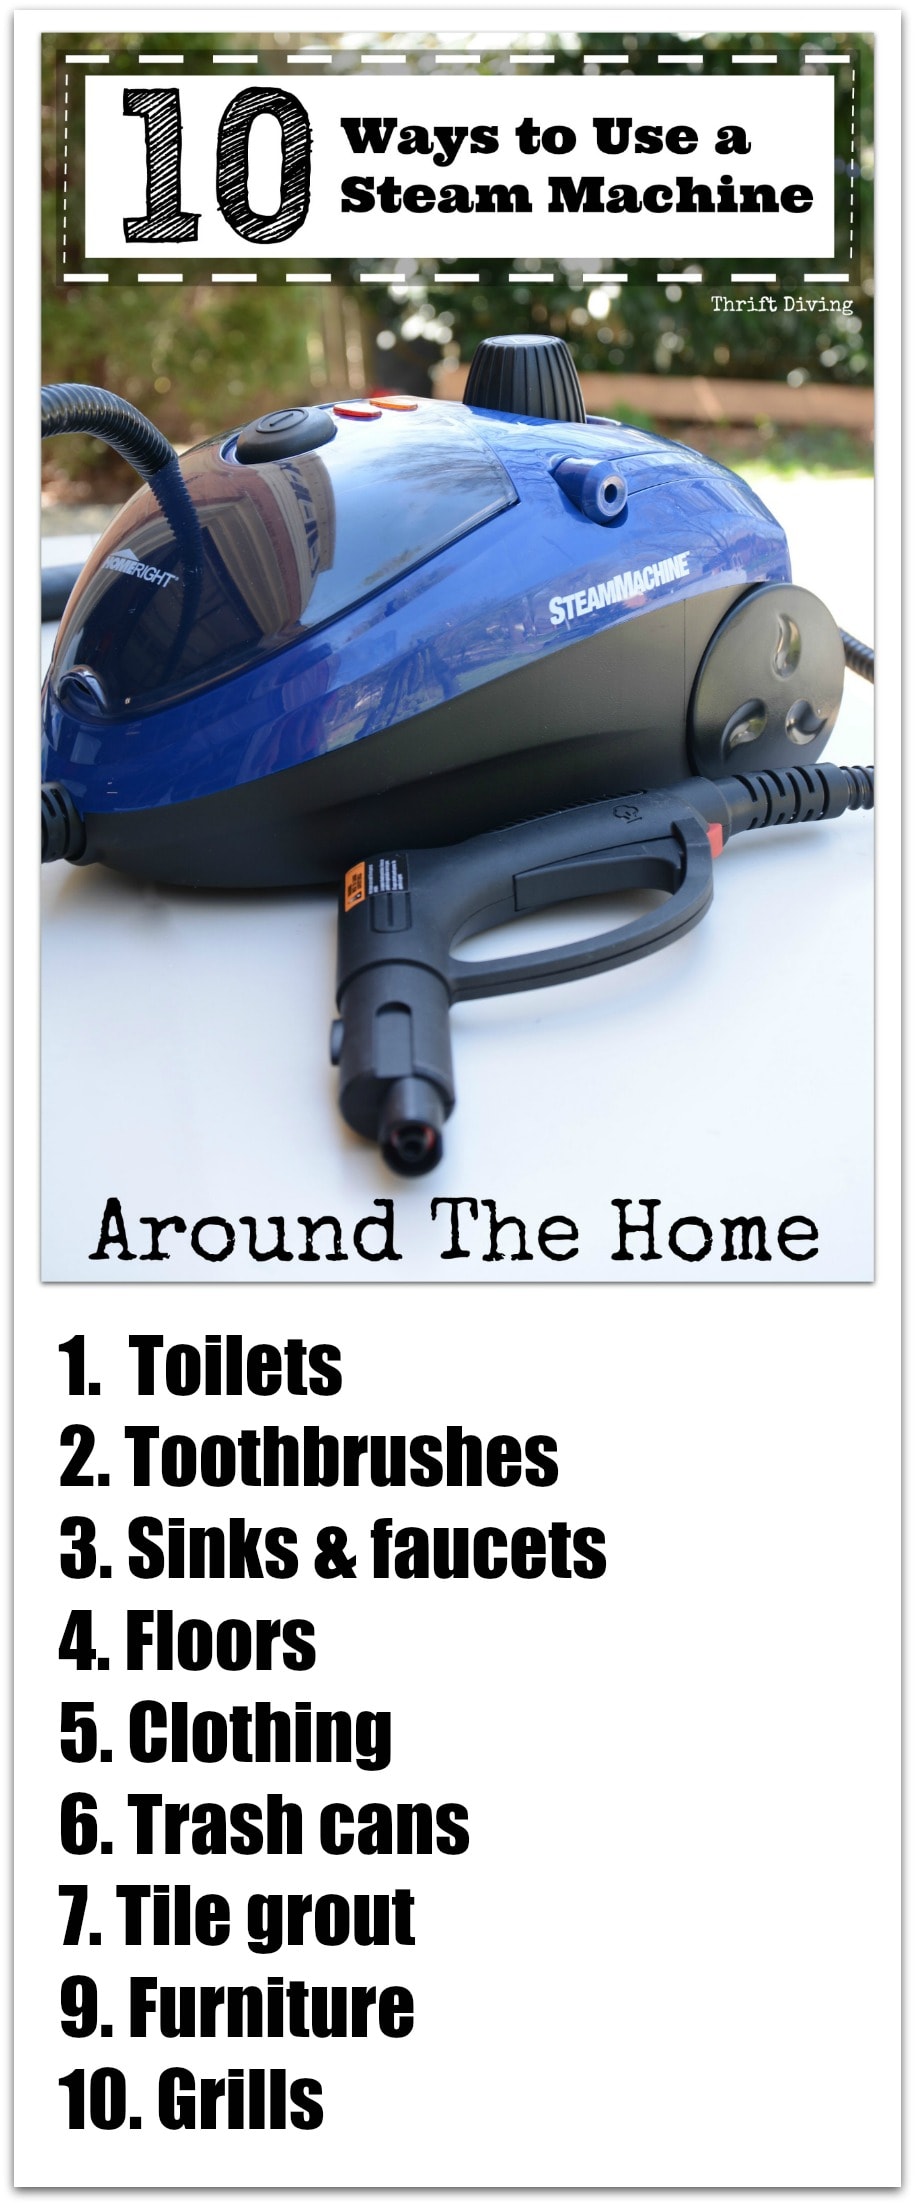 10 Ways to Use a Steam Machine Around the Home - Toilets, toothbrushes, sinks, floors, clothing, trash cans, tile grout, furniture, and grills - Thrift Diving